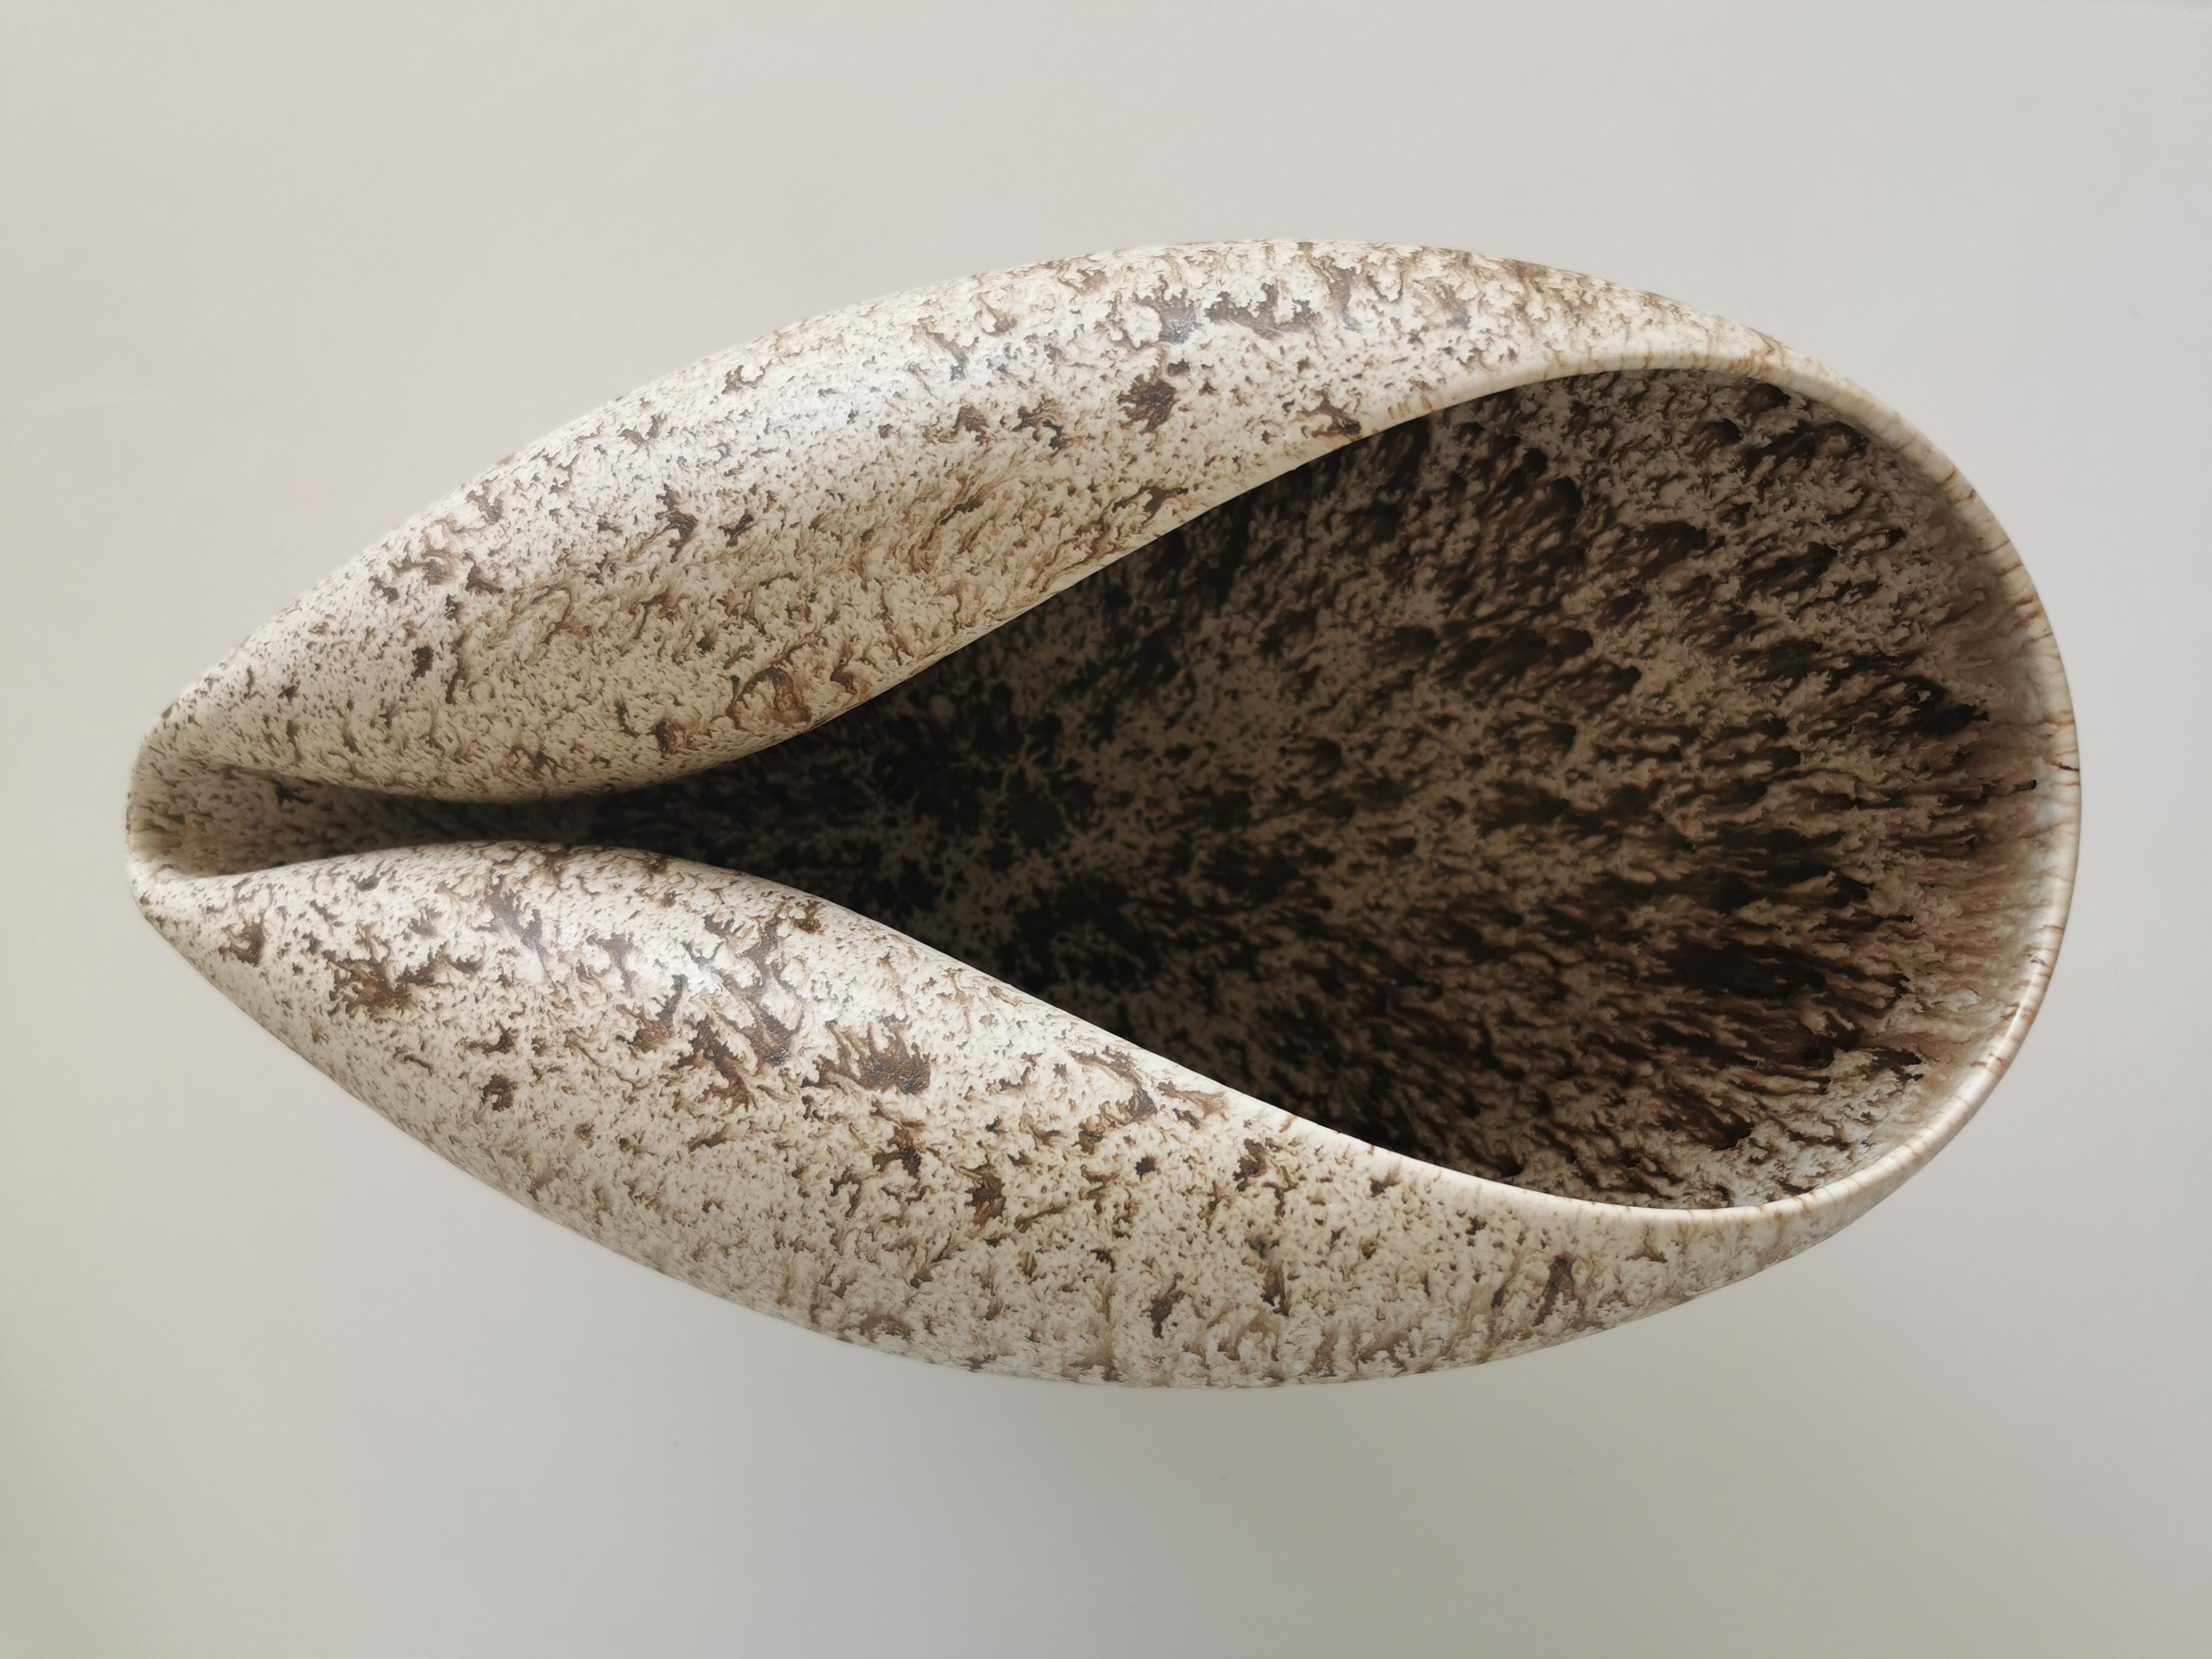 Vessel from ceramic artist Nicholas Arroyave-Portela.

No. 99 Medium long Oval form with a white and brown speckled glaze (Vessel, Interior sculpture, not suitable for holding water)

White St.Thomas clay, Stoneware glazes, multi fired to cone 6